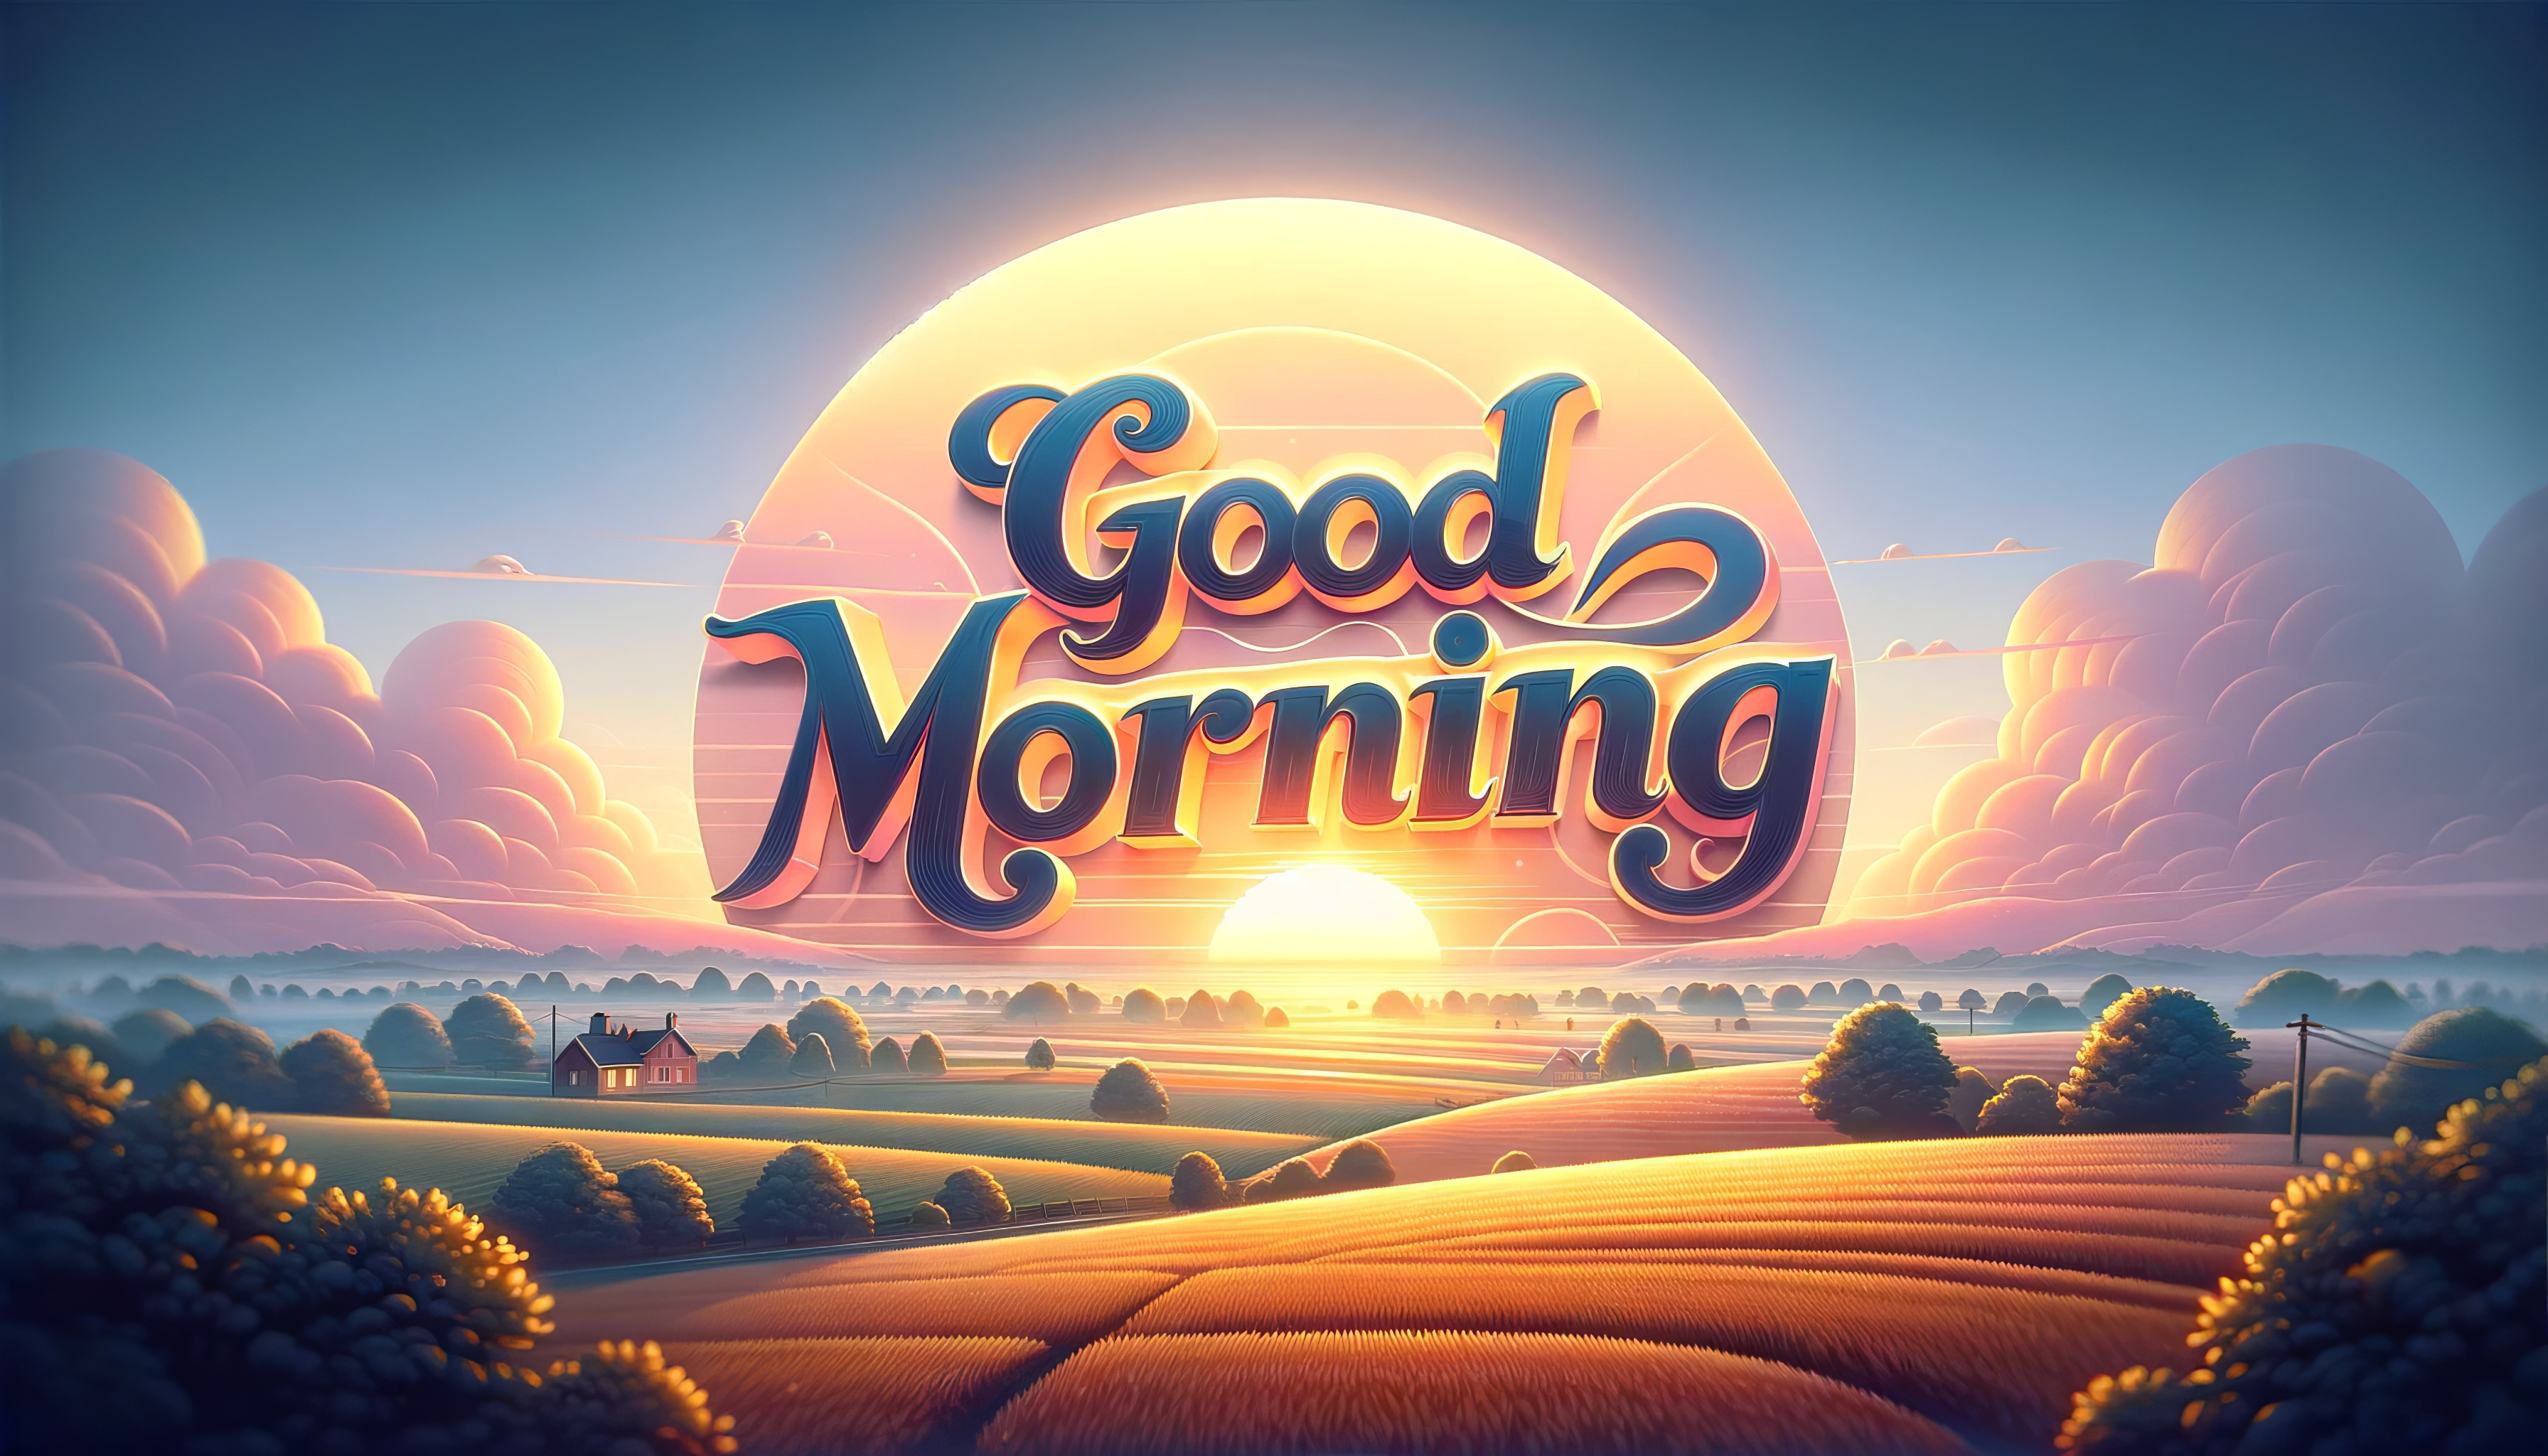 Inspirational Good Morning text overlaid on a picturesque HD landscape with rising sun wallpaper for desktop background.